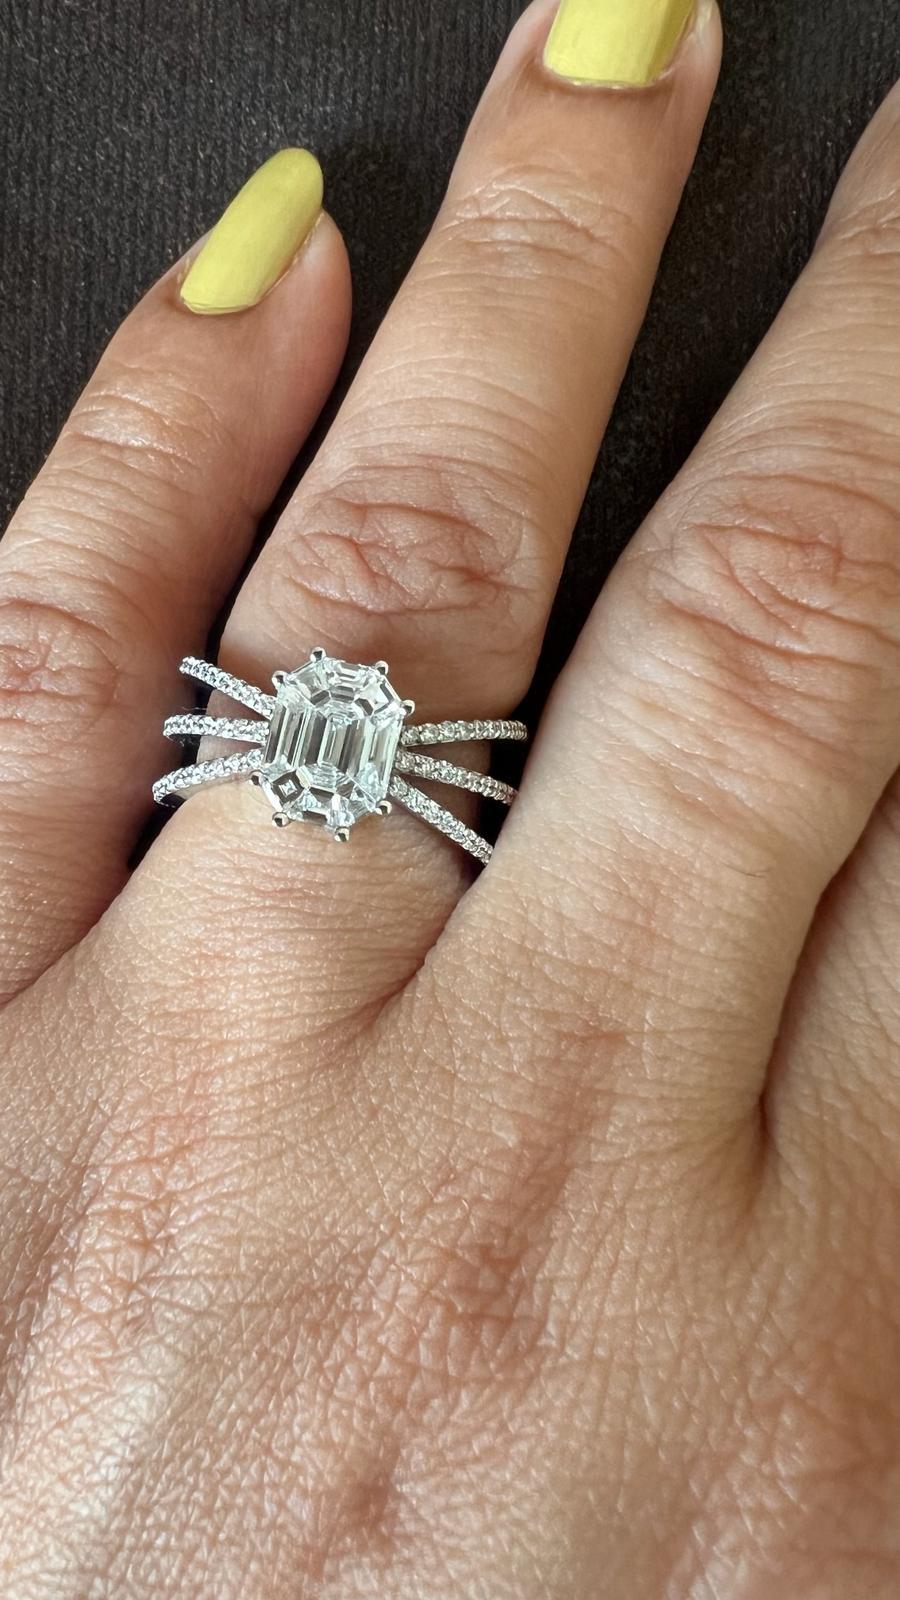 This ring is made in 18kt white gold with triple split shank splitting from the top & spreading like wings & connecting precisely towards the bottom.

Shank are half way studded with diamonds to give you a proper diamond look from the top.

The